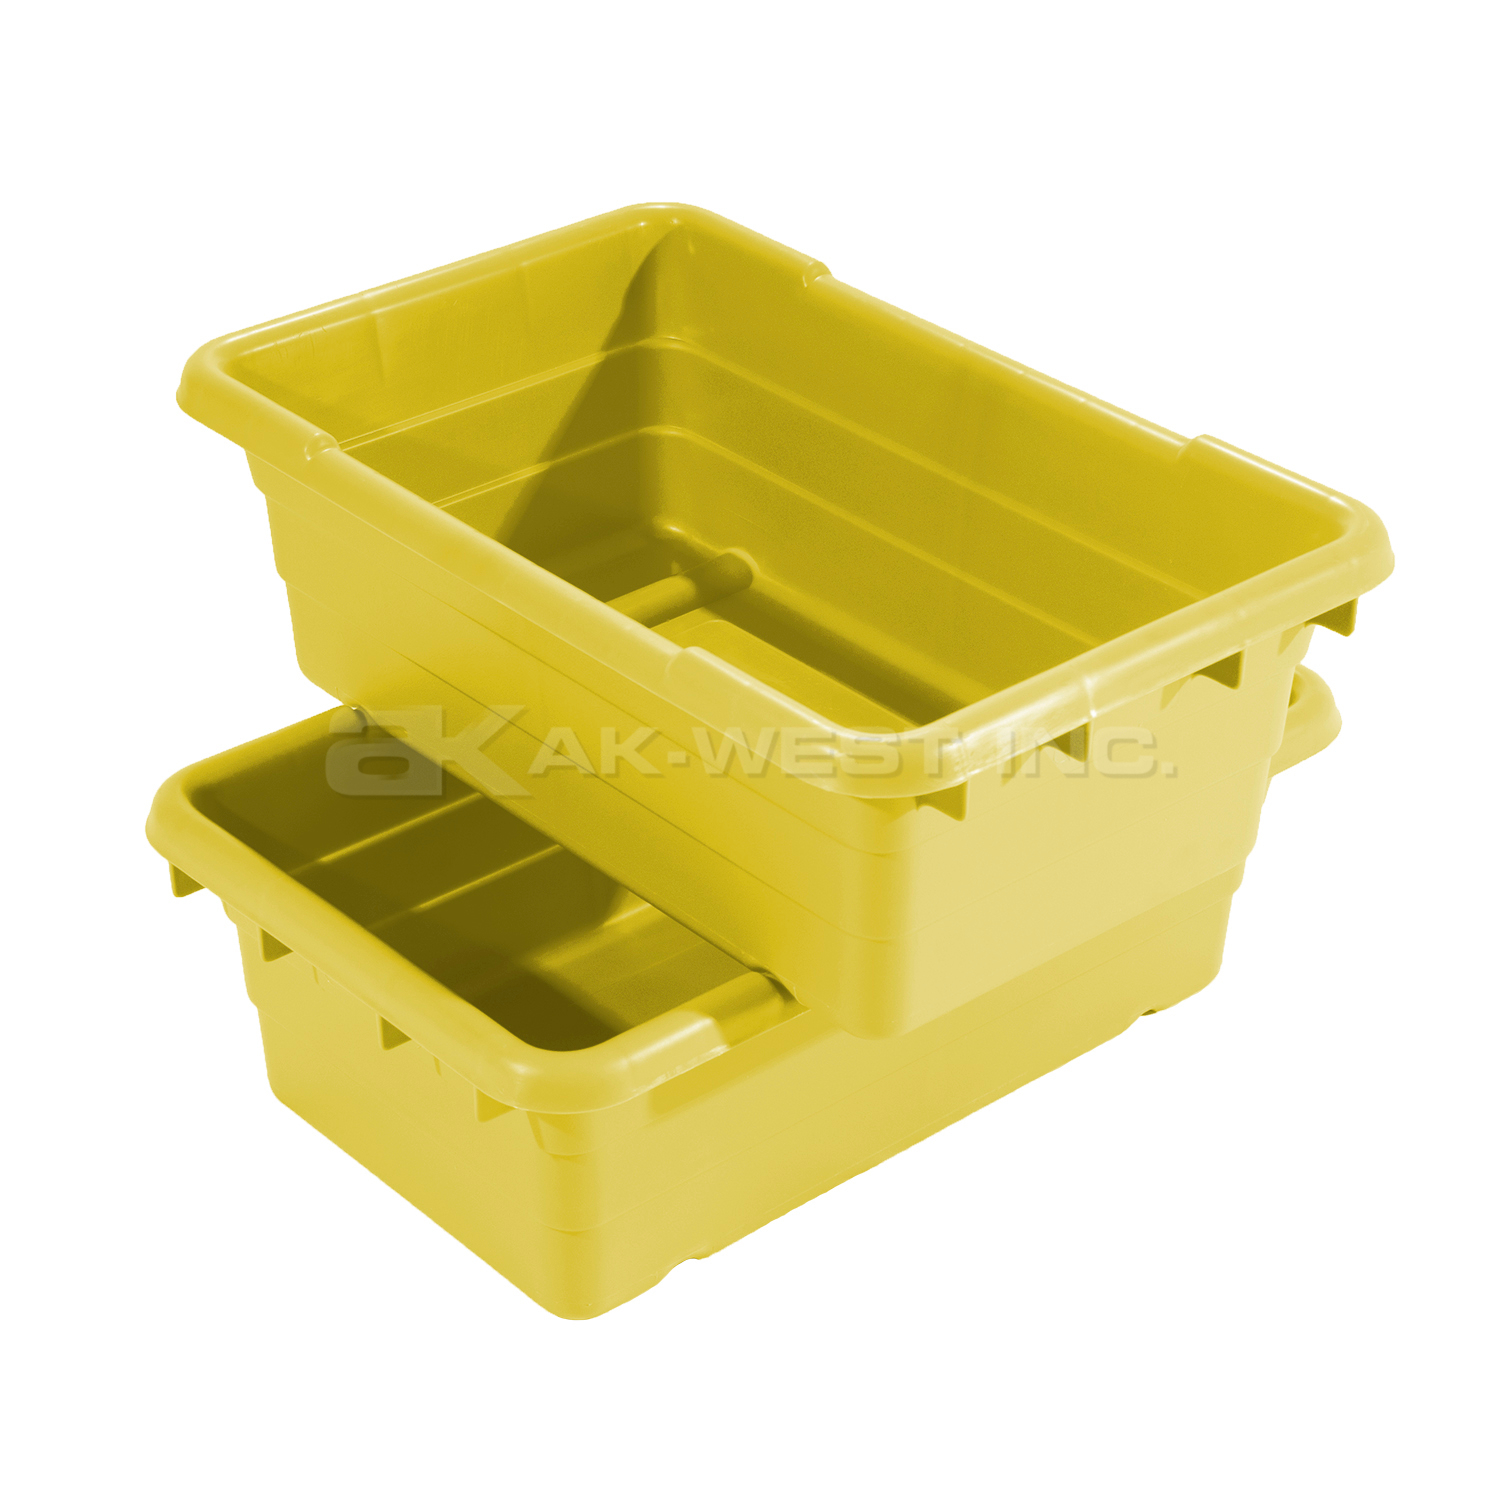 Yellow, 25" x 16" x 9", Jumbo Lug Cross Stack and Nest Container, Polypropylene Version